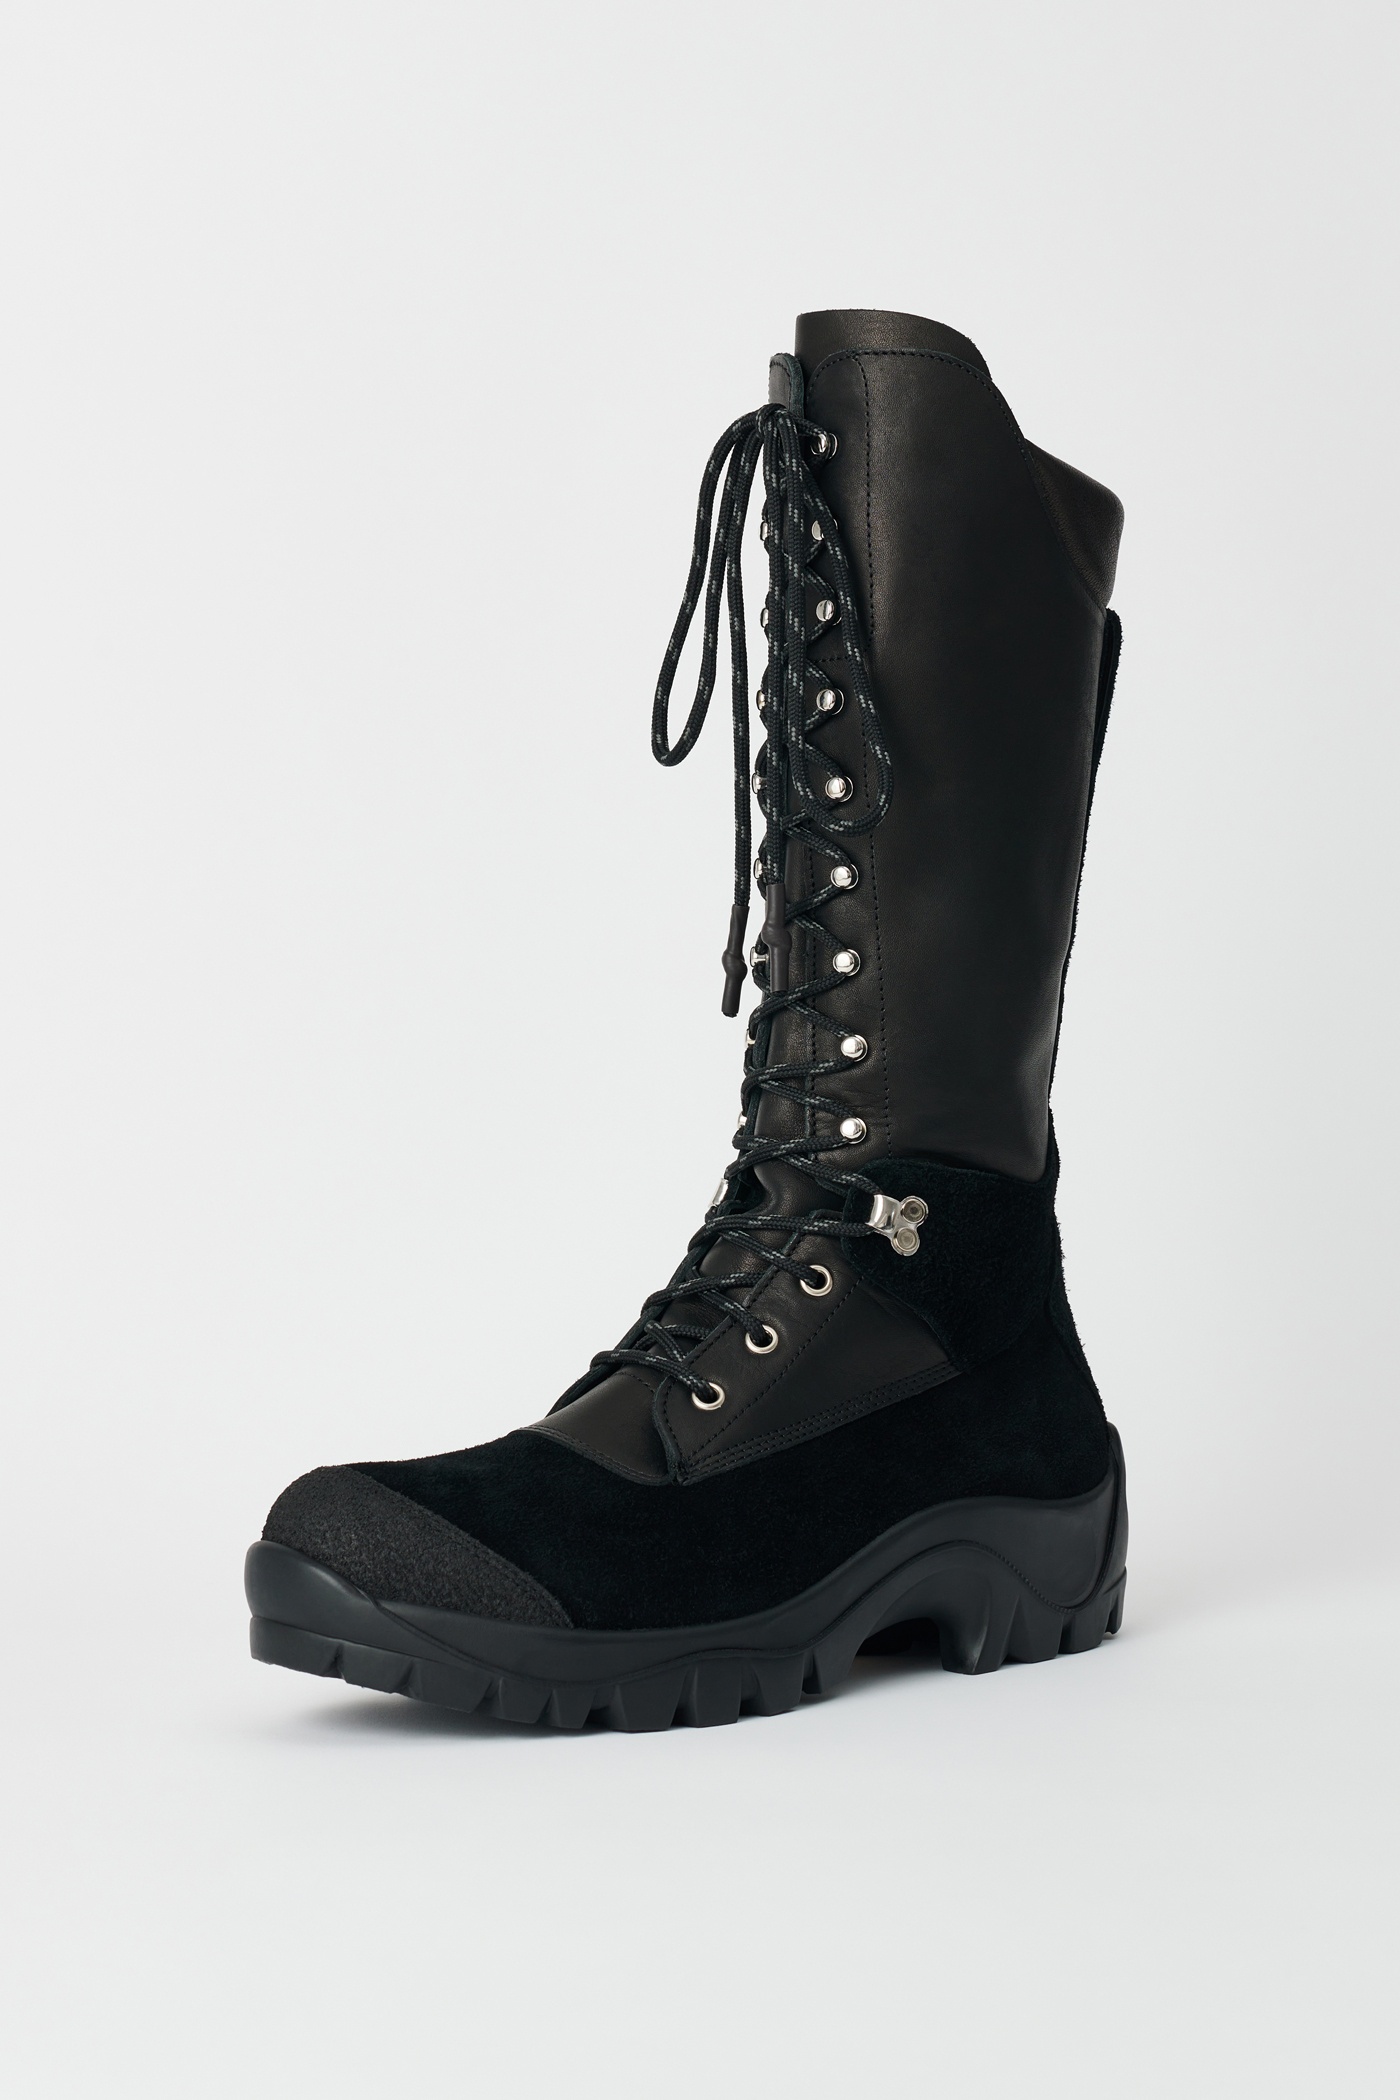 Tower Hiker Boot Black Leather - 4